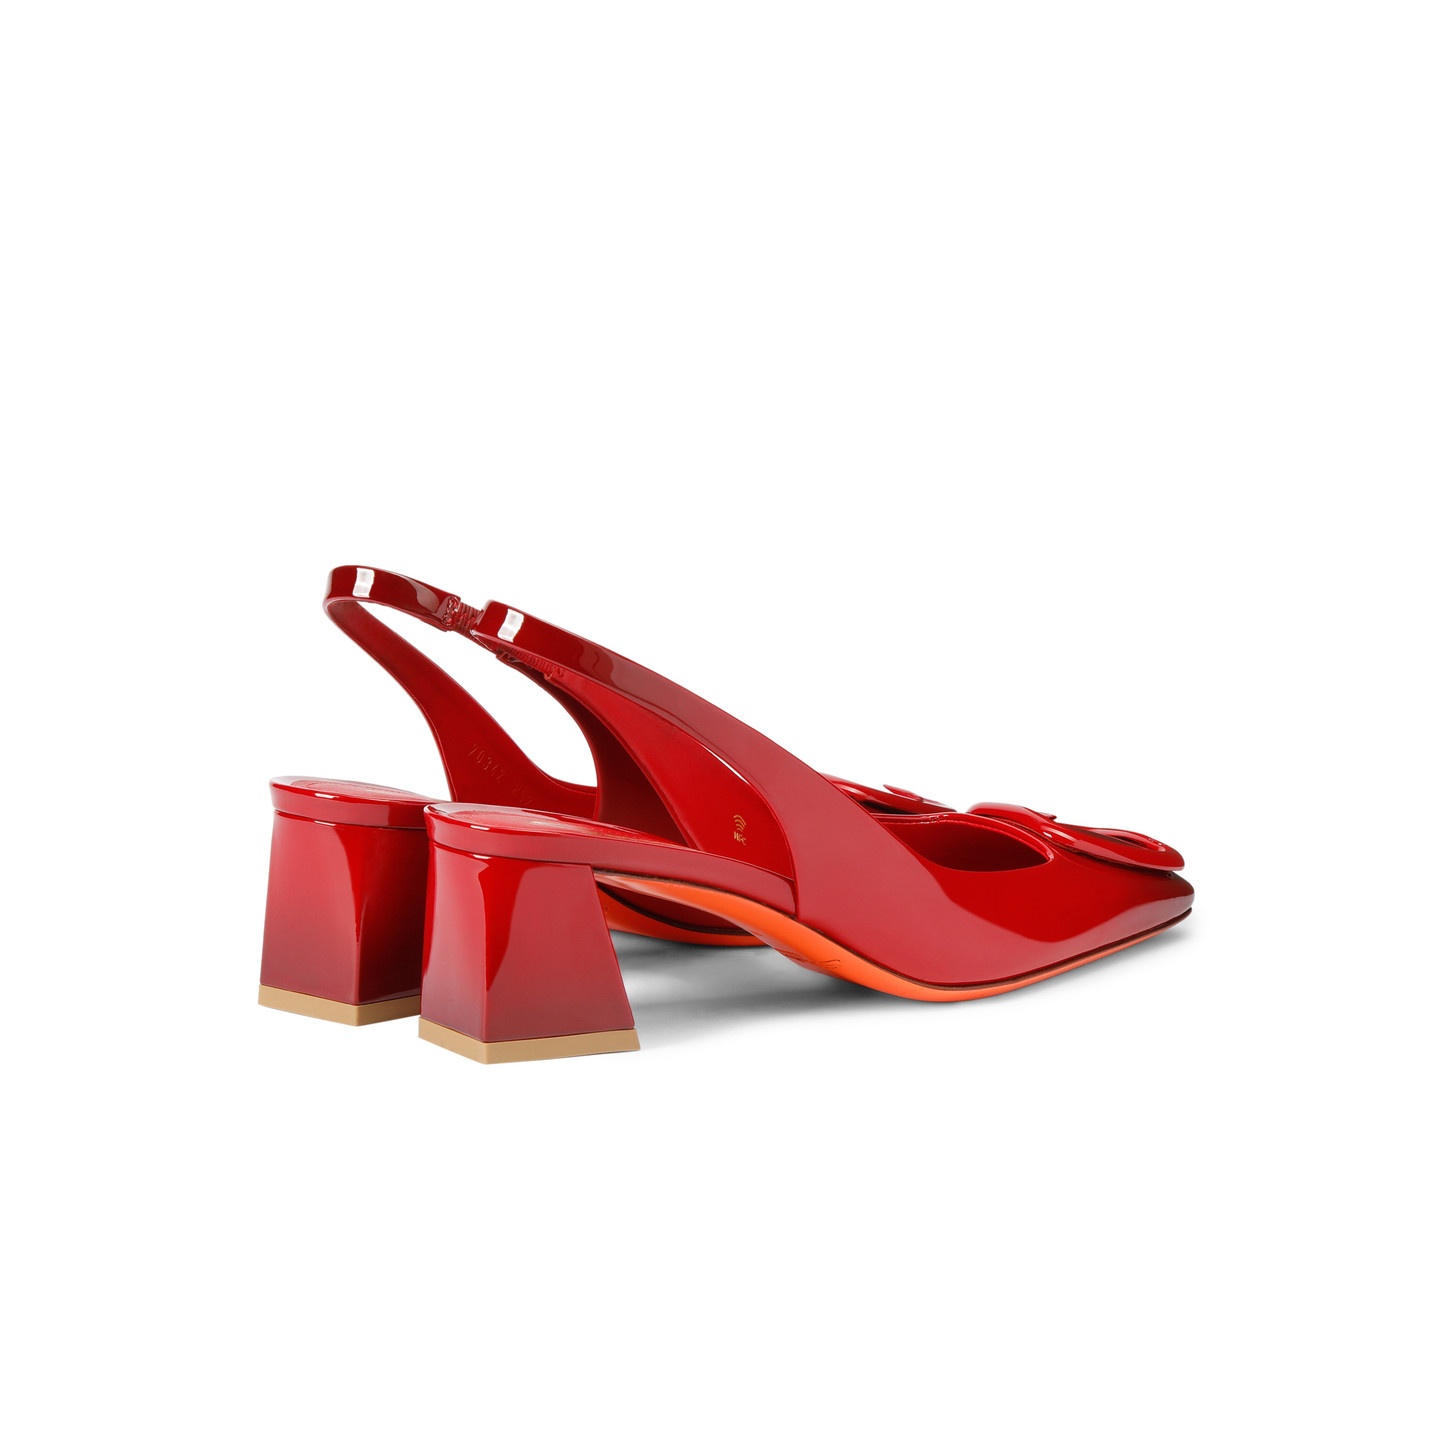 Women's red patent leather mid-heel slingback - 3